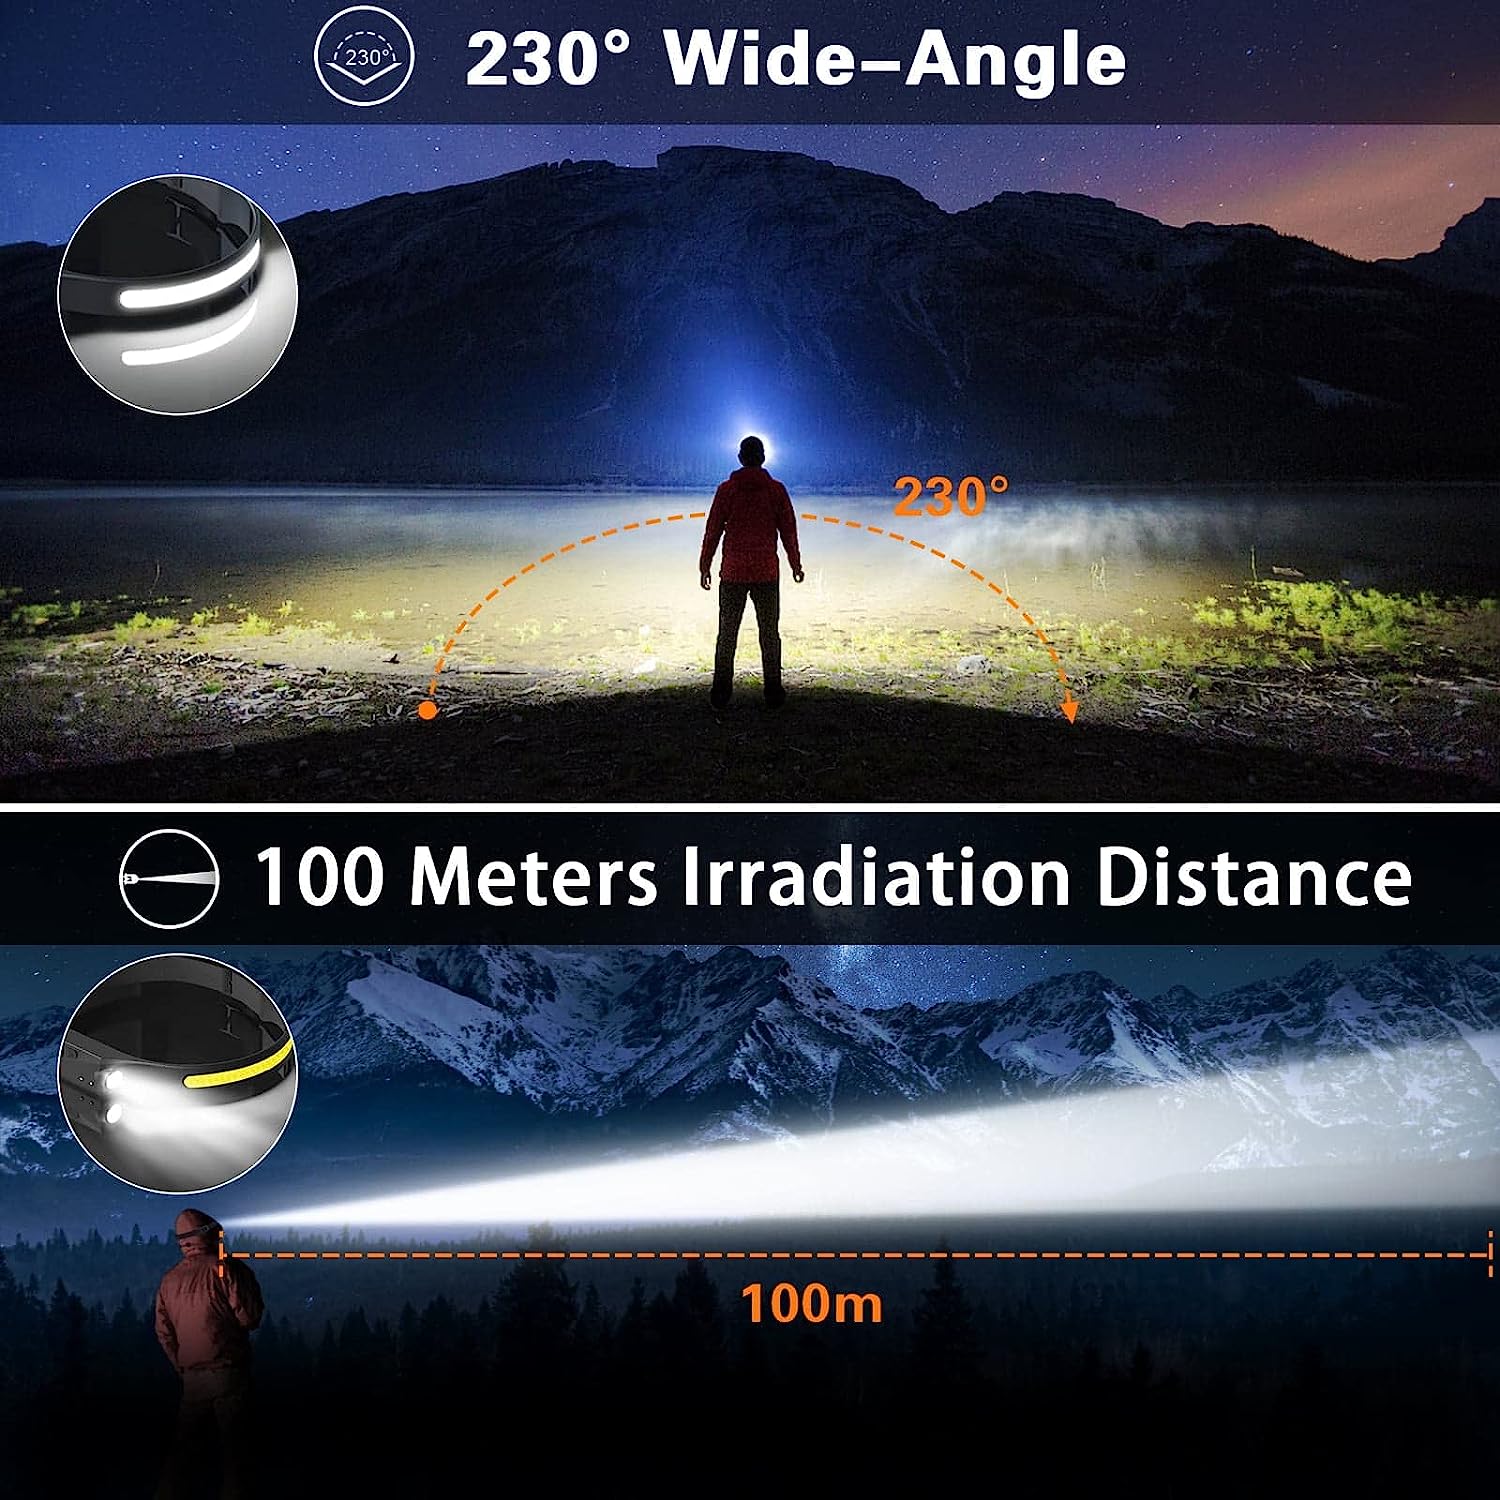 LED Headlamp Sensor Headlight With Built-in Battery Head Flashlight USB Rechargeable - enoughdream.com